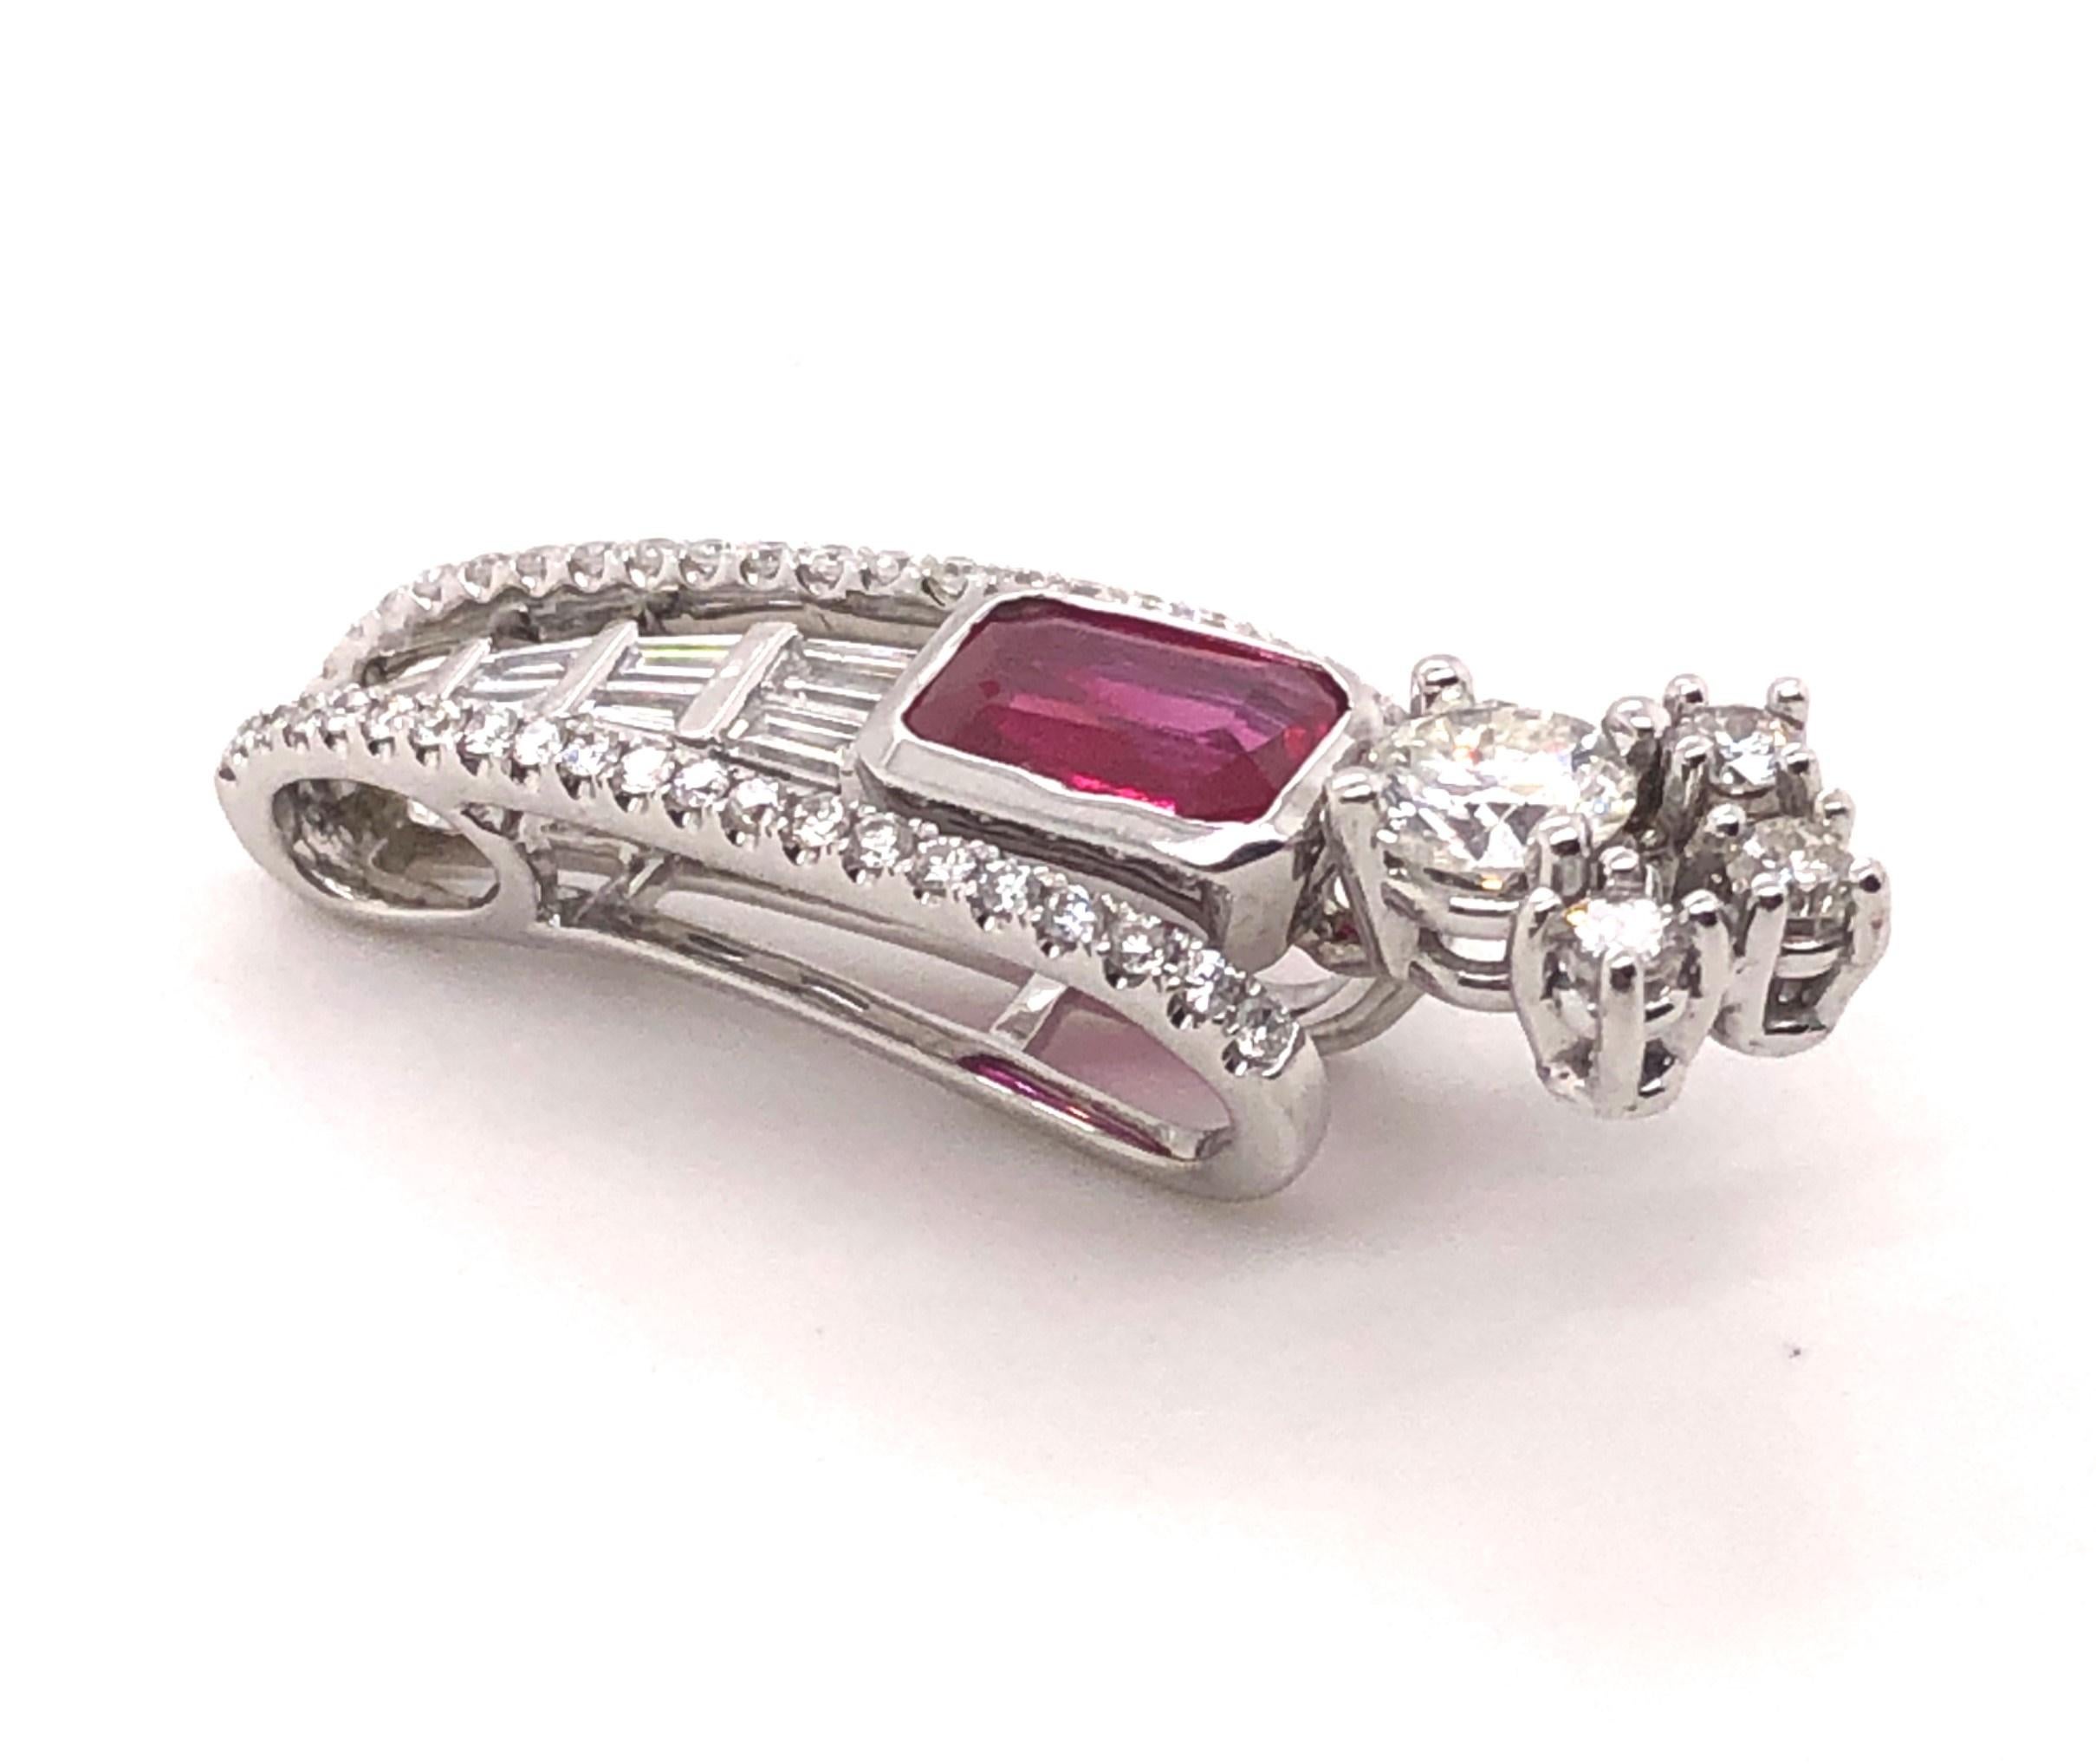 18kt white gold approximately 1.72ct Natural Ruby and approximately 1.95 carat VS1-SI2 Diamond Slide Pendant. 

The pendant slide measures 1.25 inches long by 3/8 inches at the widest point. 